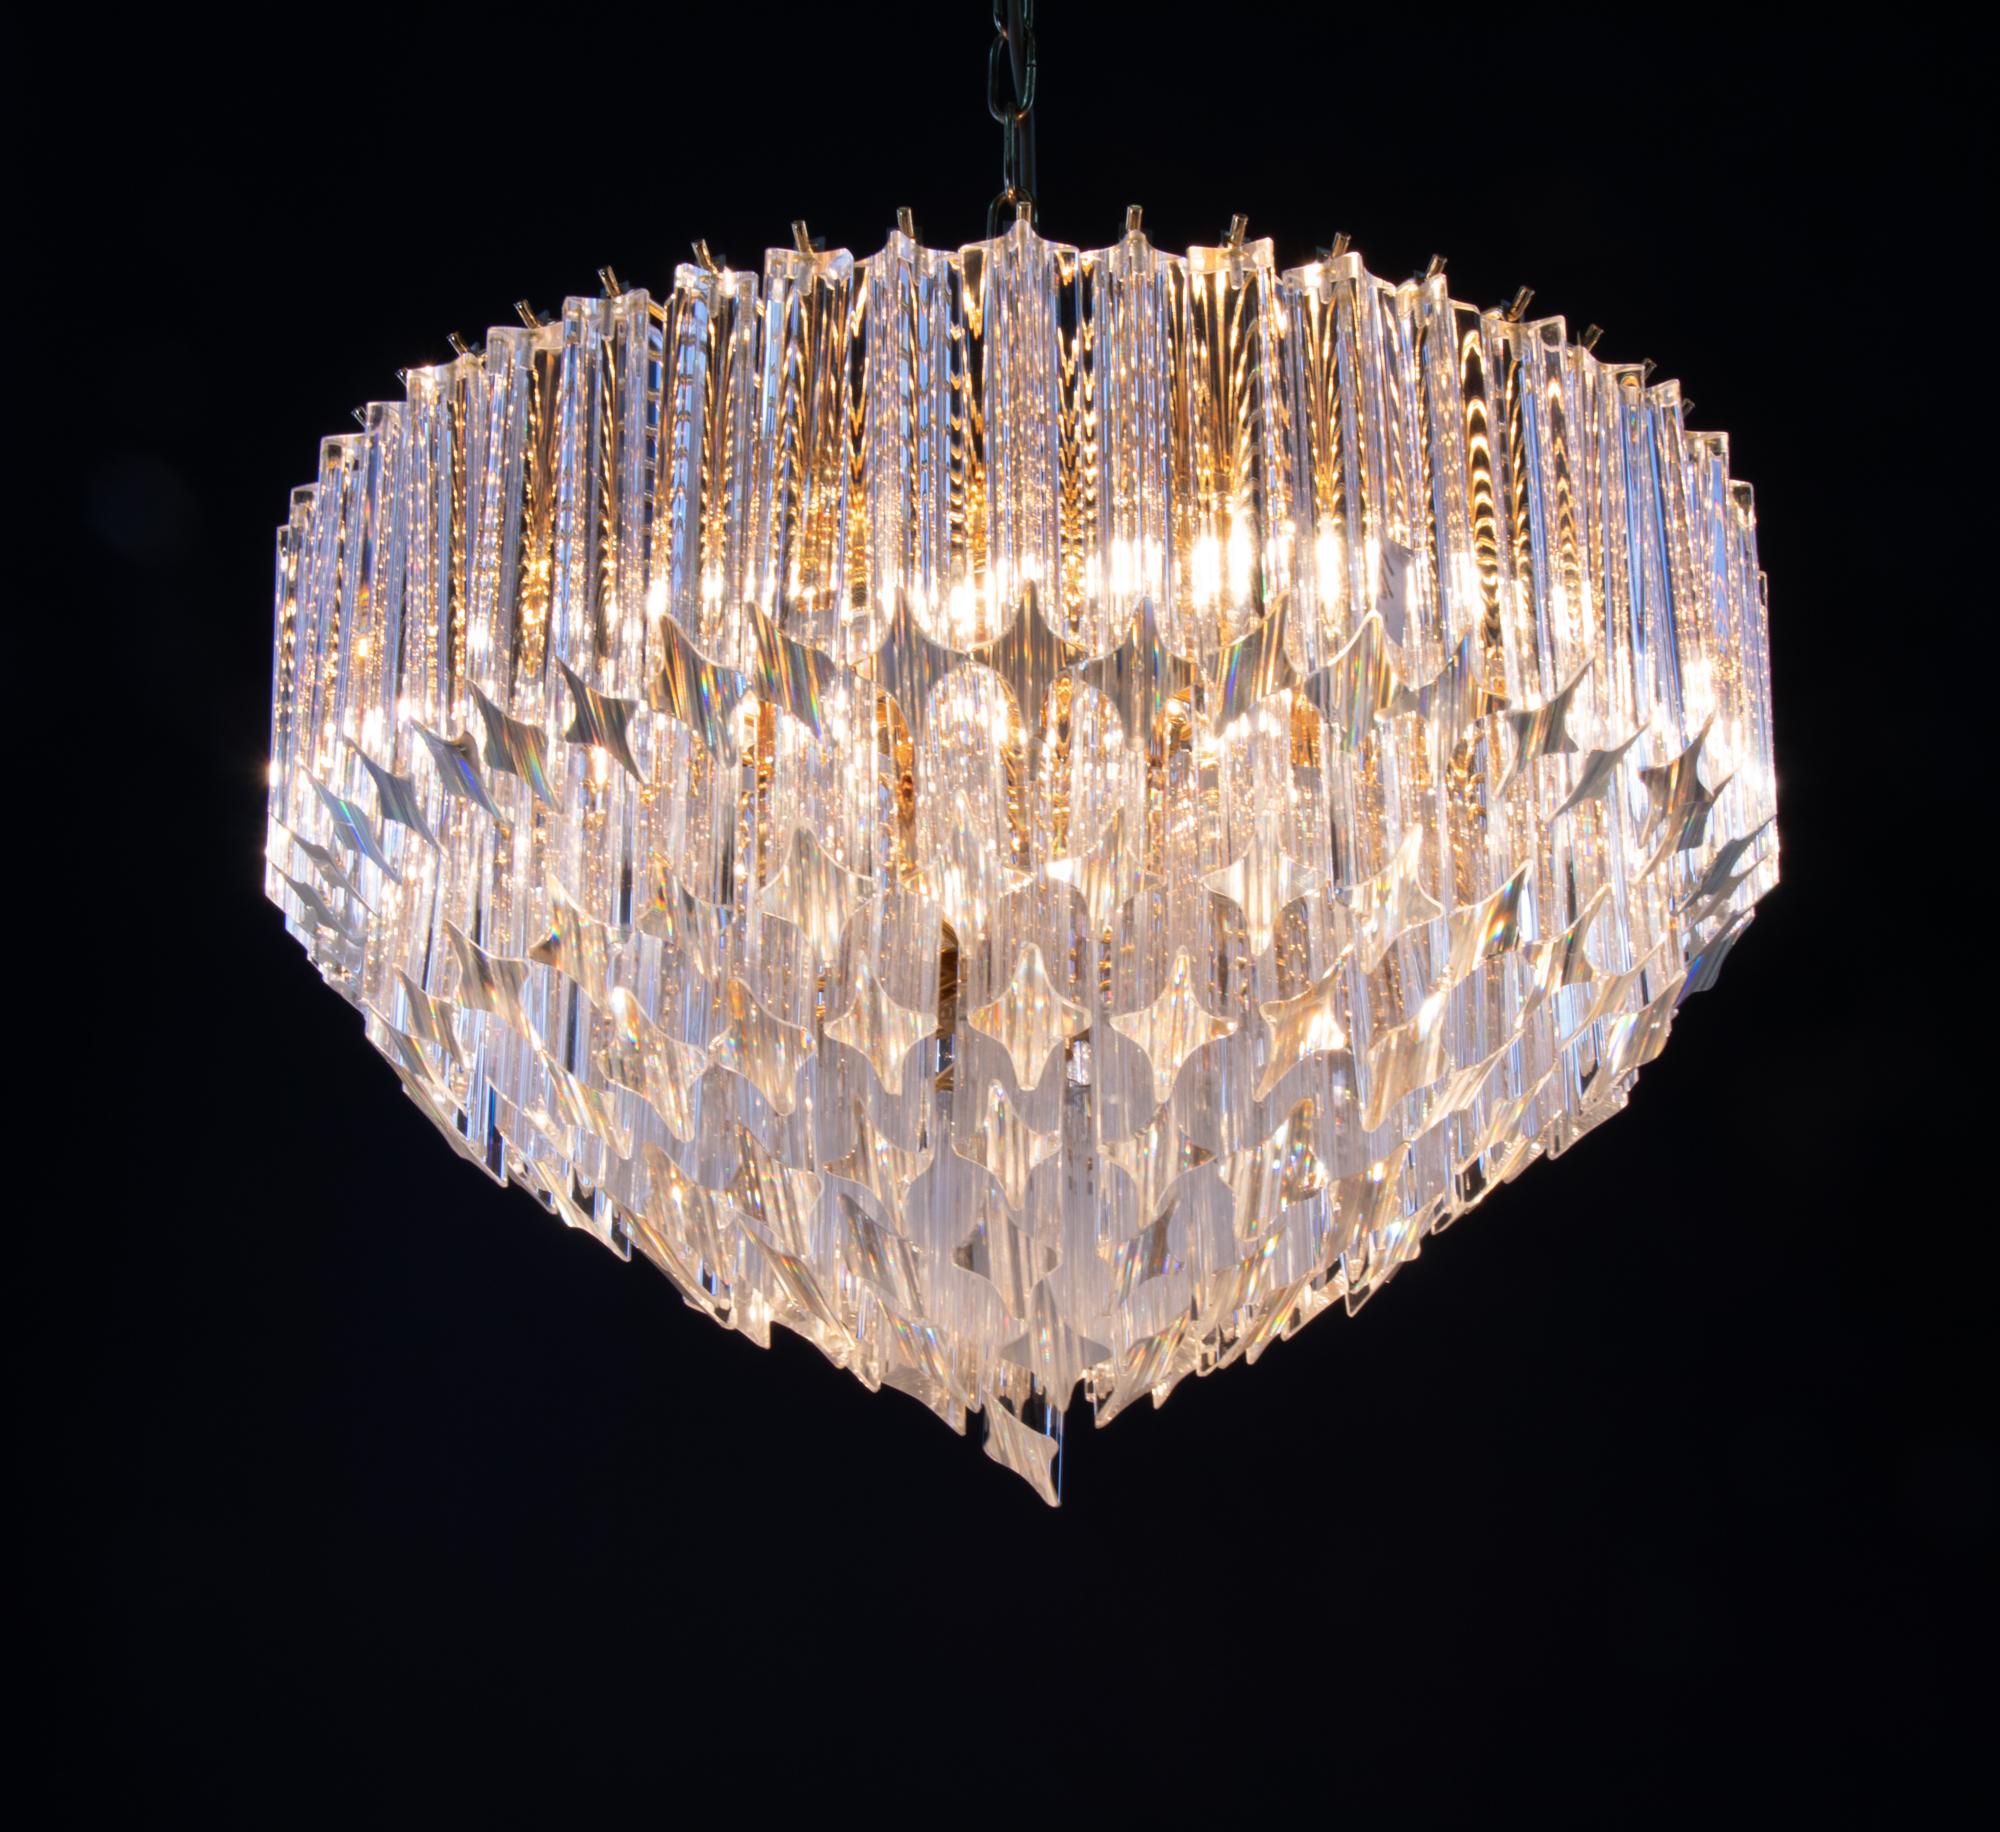 Elegant large chandelier with clear crystal prisms mounted on a round gilt-brass frame. Has 6 sockets. In very good condition. Gives beautiful light. The sparkling and glittering Novaresi chandeliers are hanging in the Residence of the Empress